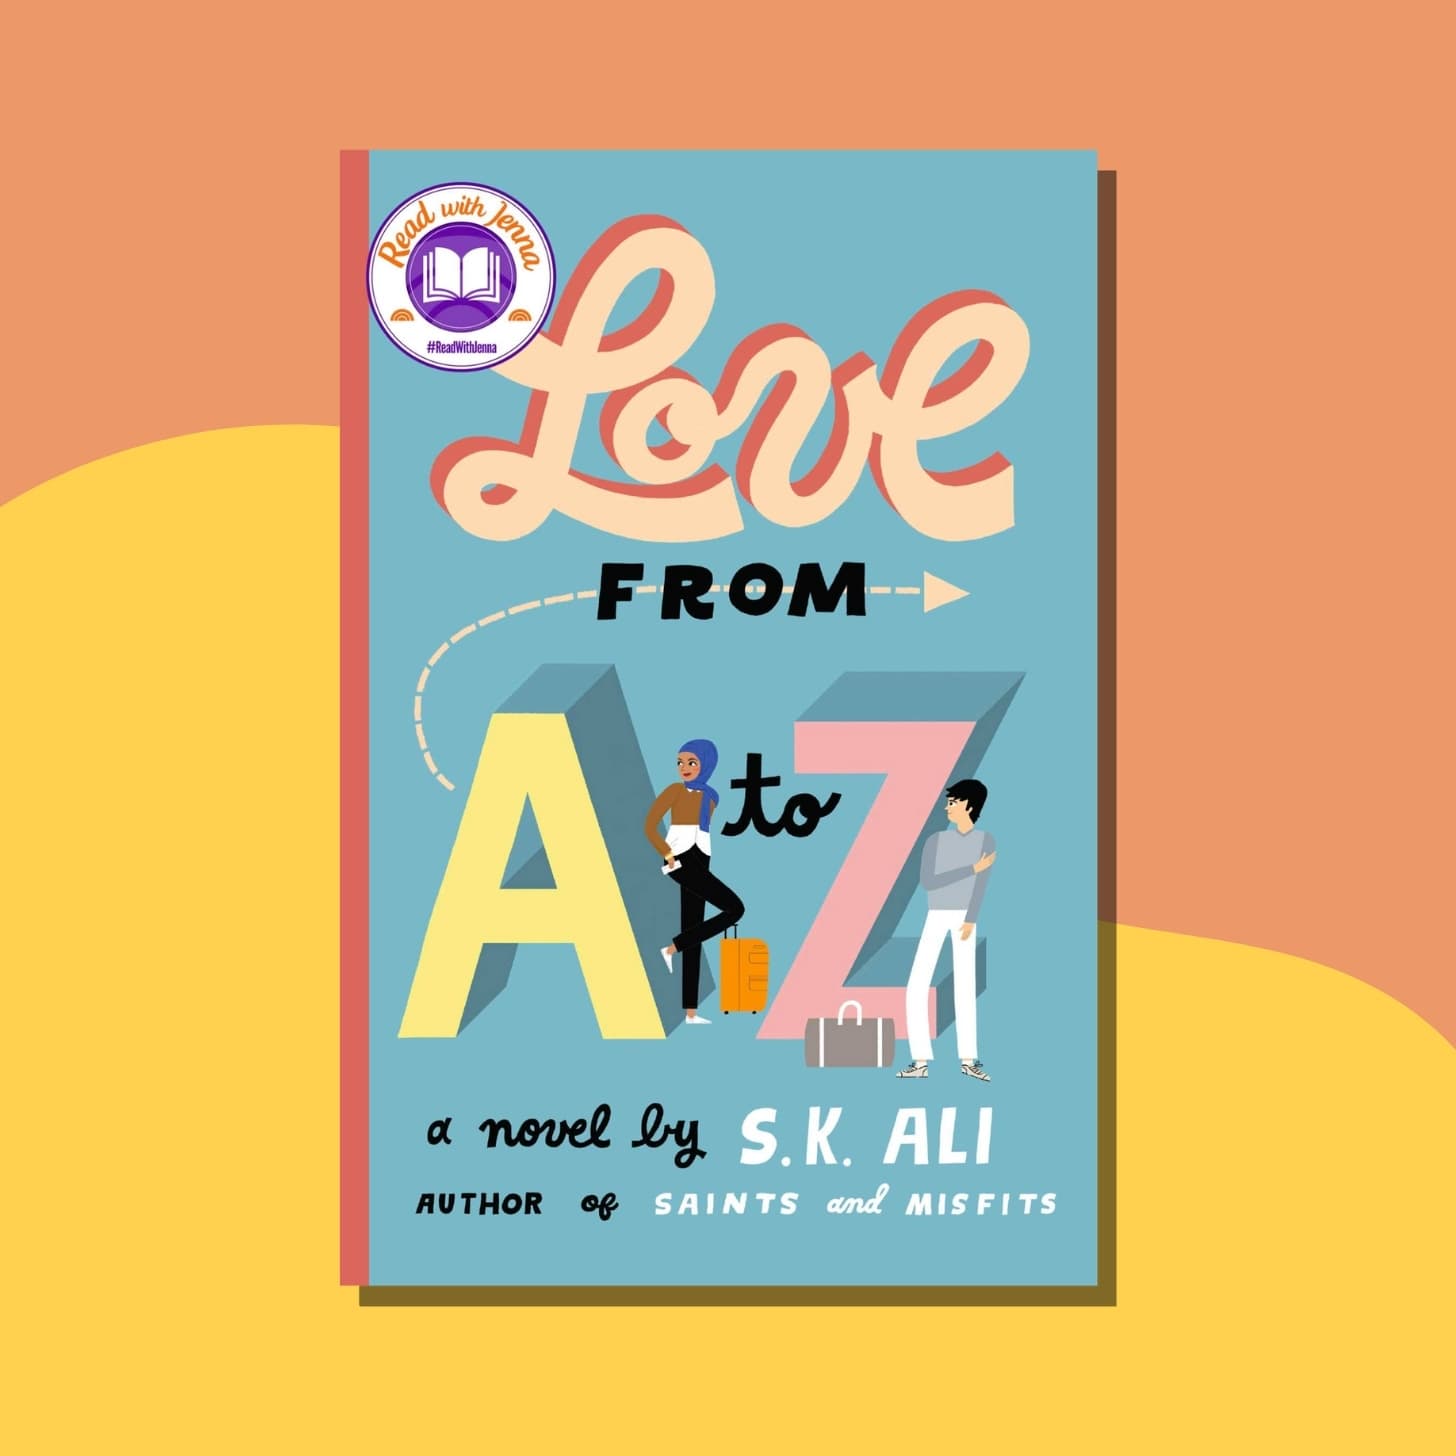 “Love from A to Z” by S. K. Ali